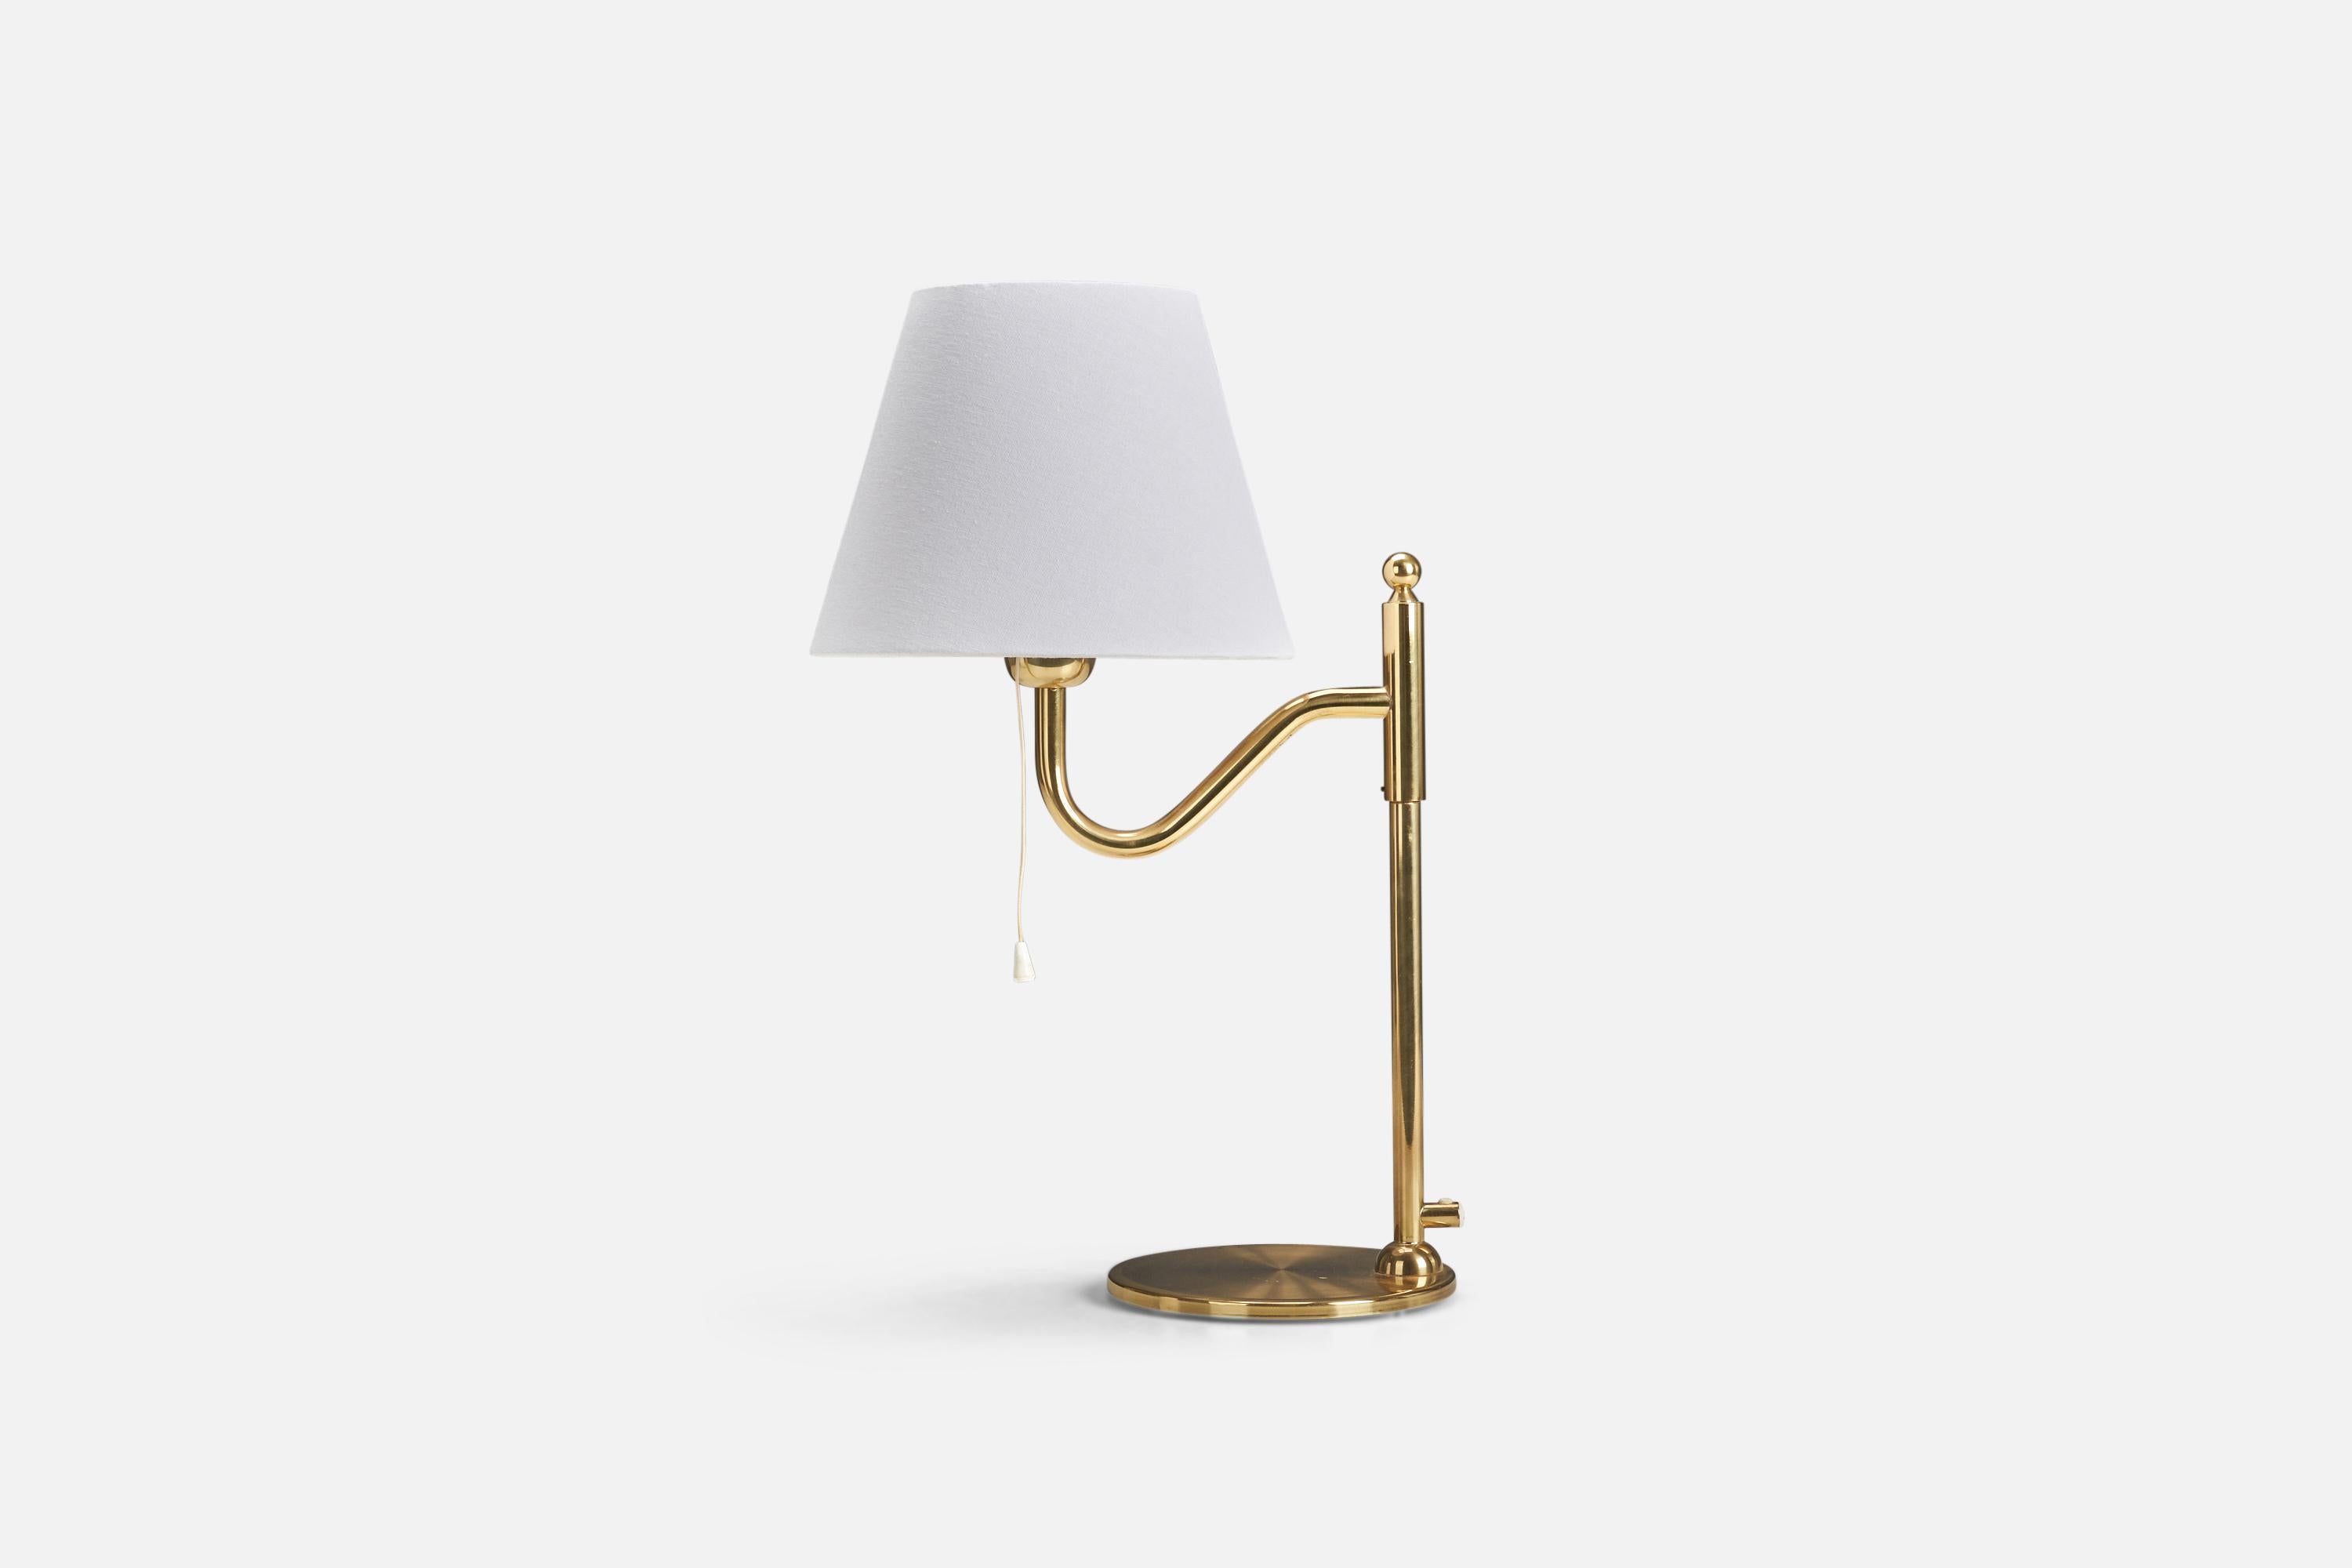 A brass and fabric table lamp designed and produced by a Swedish Designer, Sweden, 1970s.

Dimensions of Lamp (inches) : 14.87 x 6.9 x 9.62 (Height x Width x Depth)
Dimensions of Lampshade (inches) : 5.5 x 9.5 x 7.5 (Top Diameter x Bottom